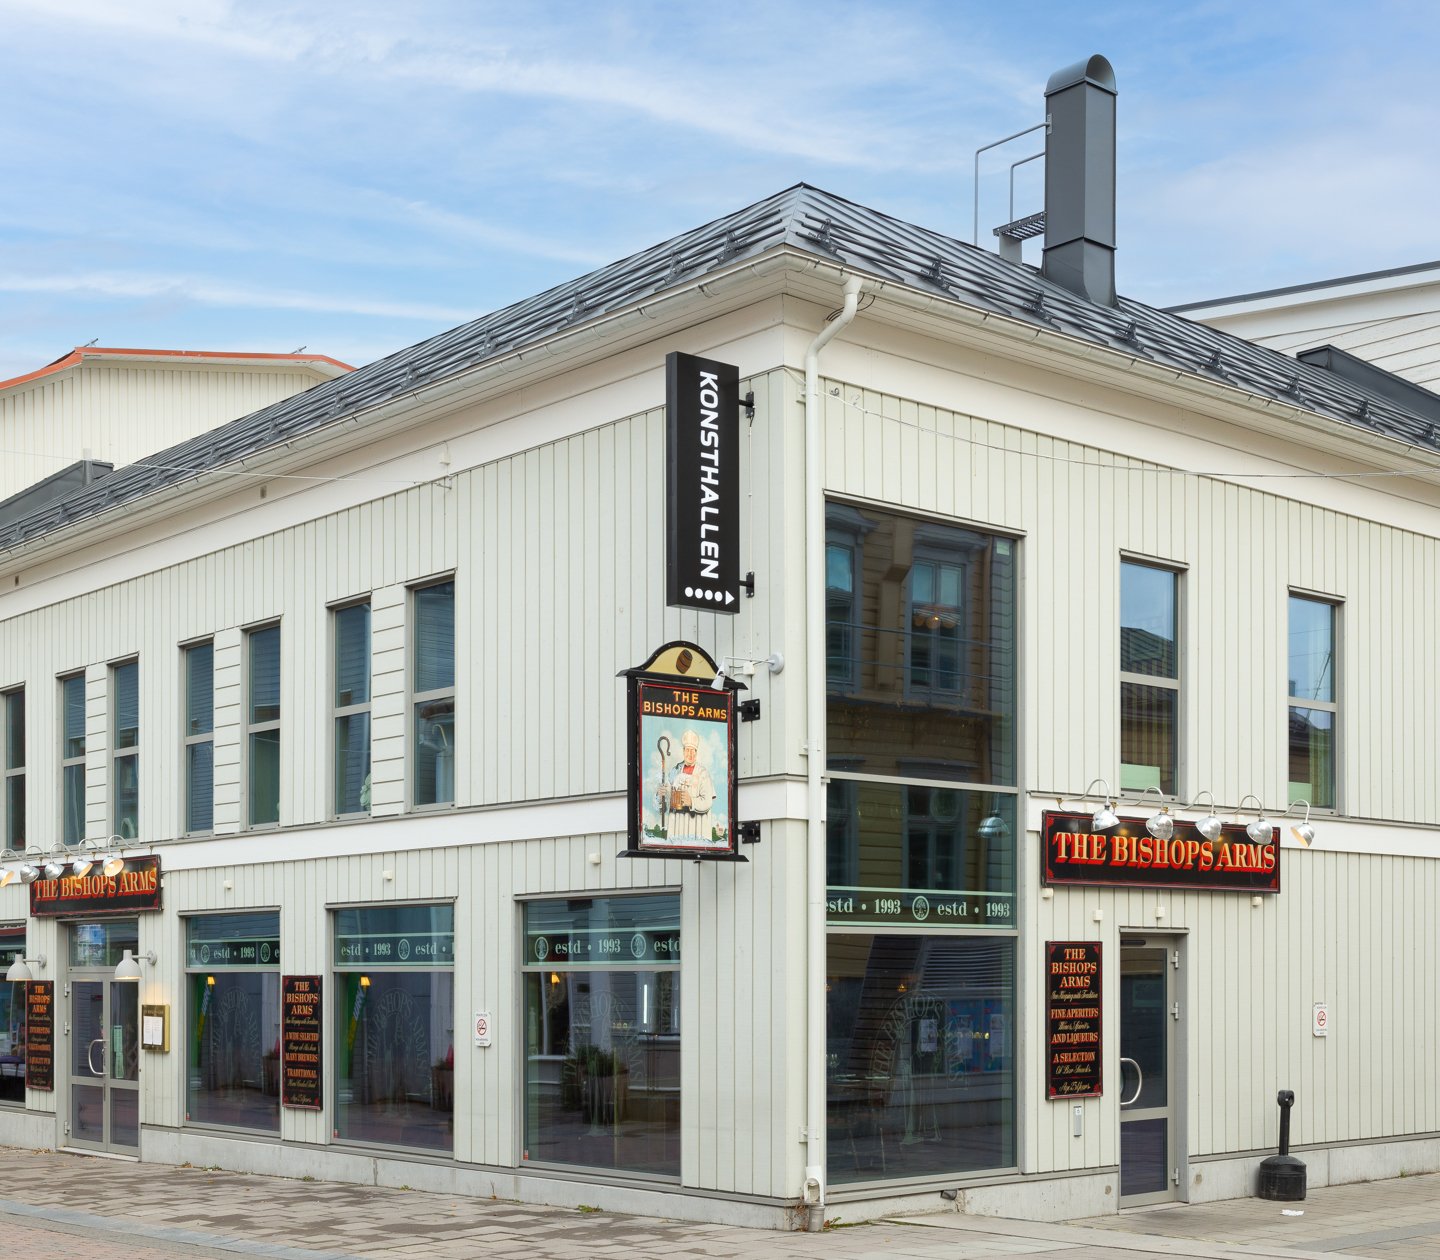 The facade at Hotel Bishops Arms in Piteå